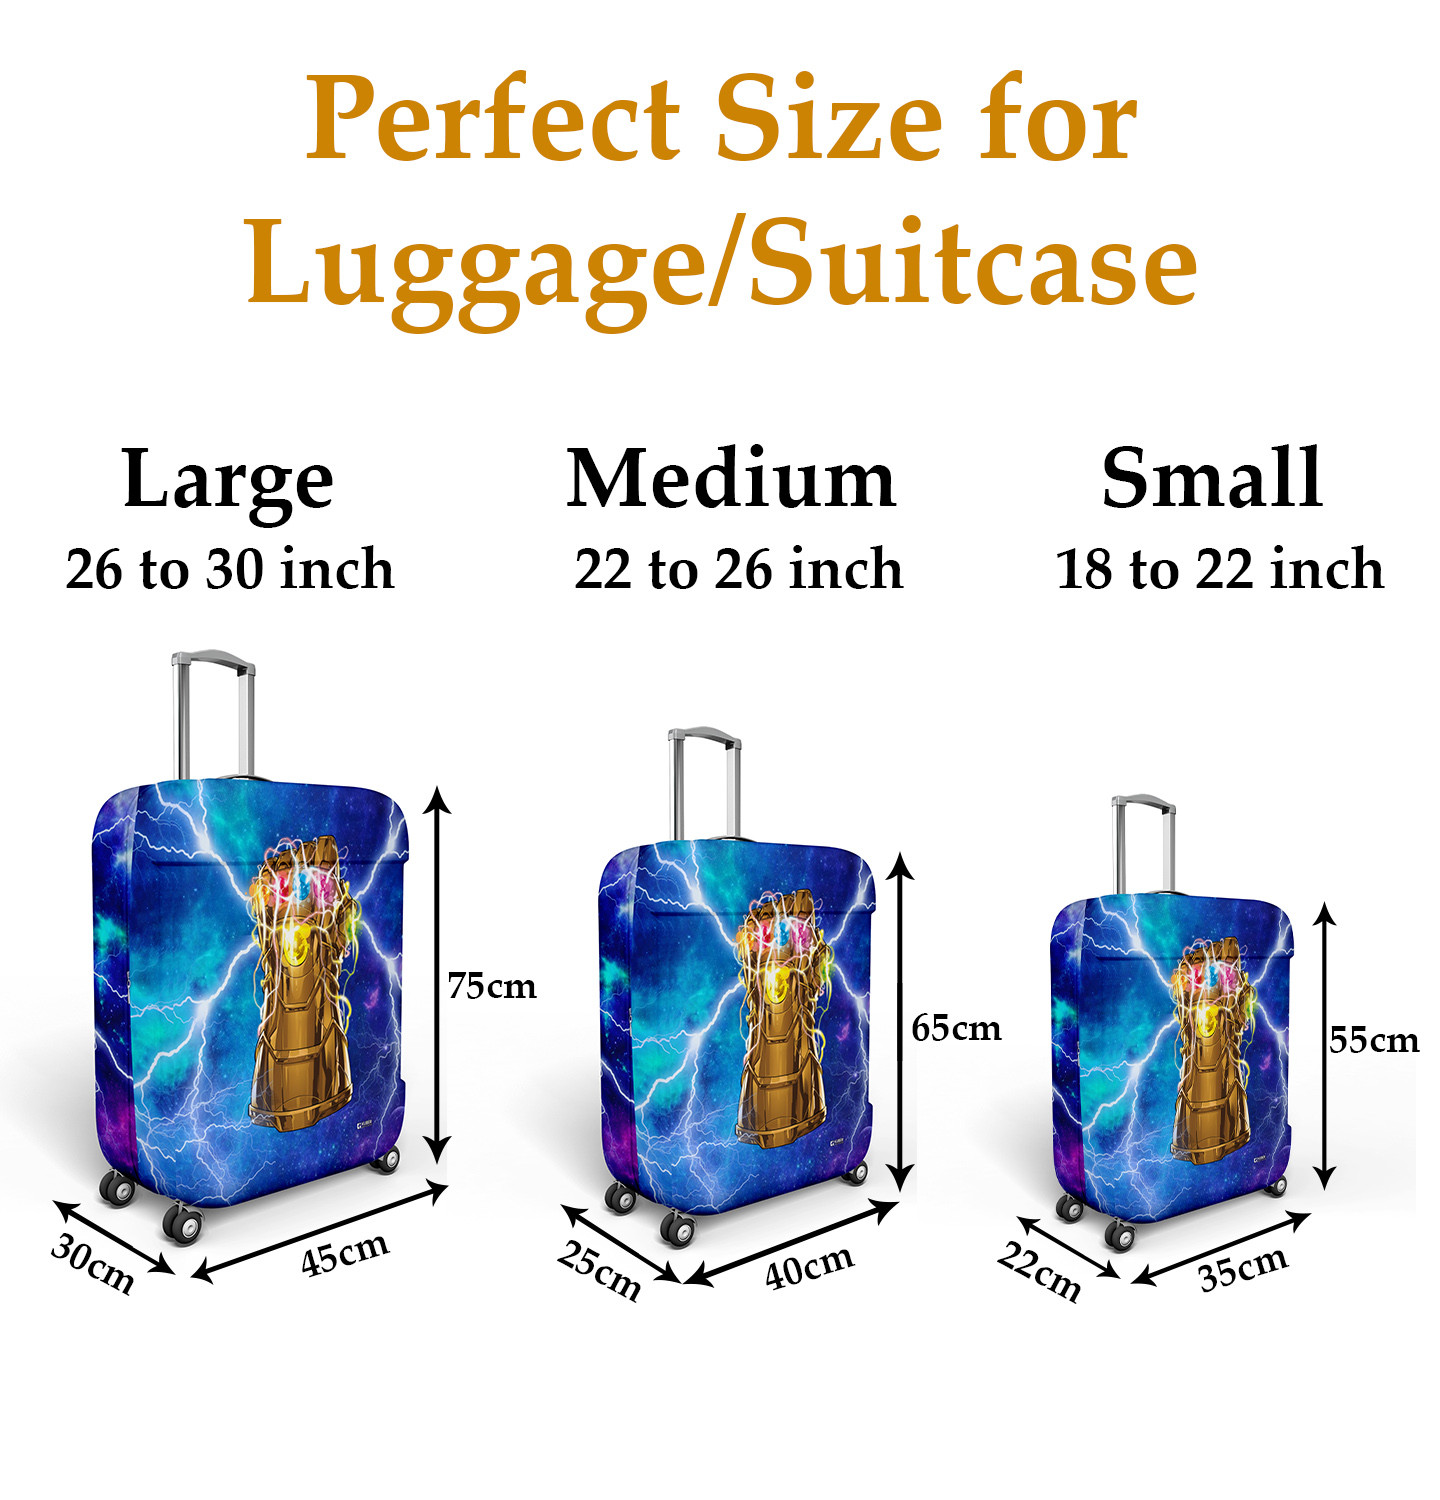 Kuber Industries Marvel The Infinity Gauntlet Luggage Cover|Polyester Travel Suitcase Cover|Washable|Stretchable Suitcase Cover|18-22 Inch-Small|22-26 Inch-Medium|Pack of 2 (Sky Blue)